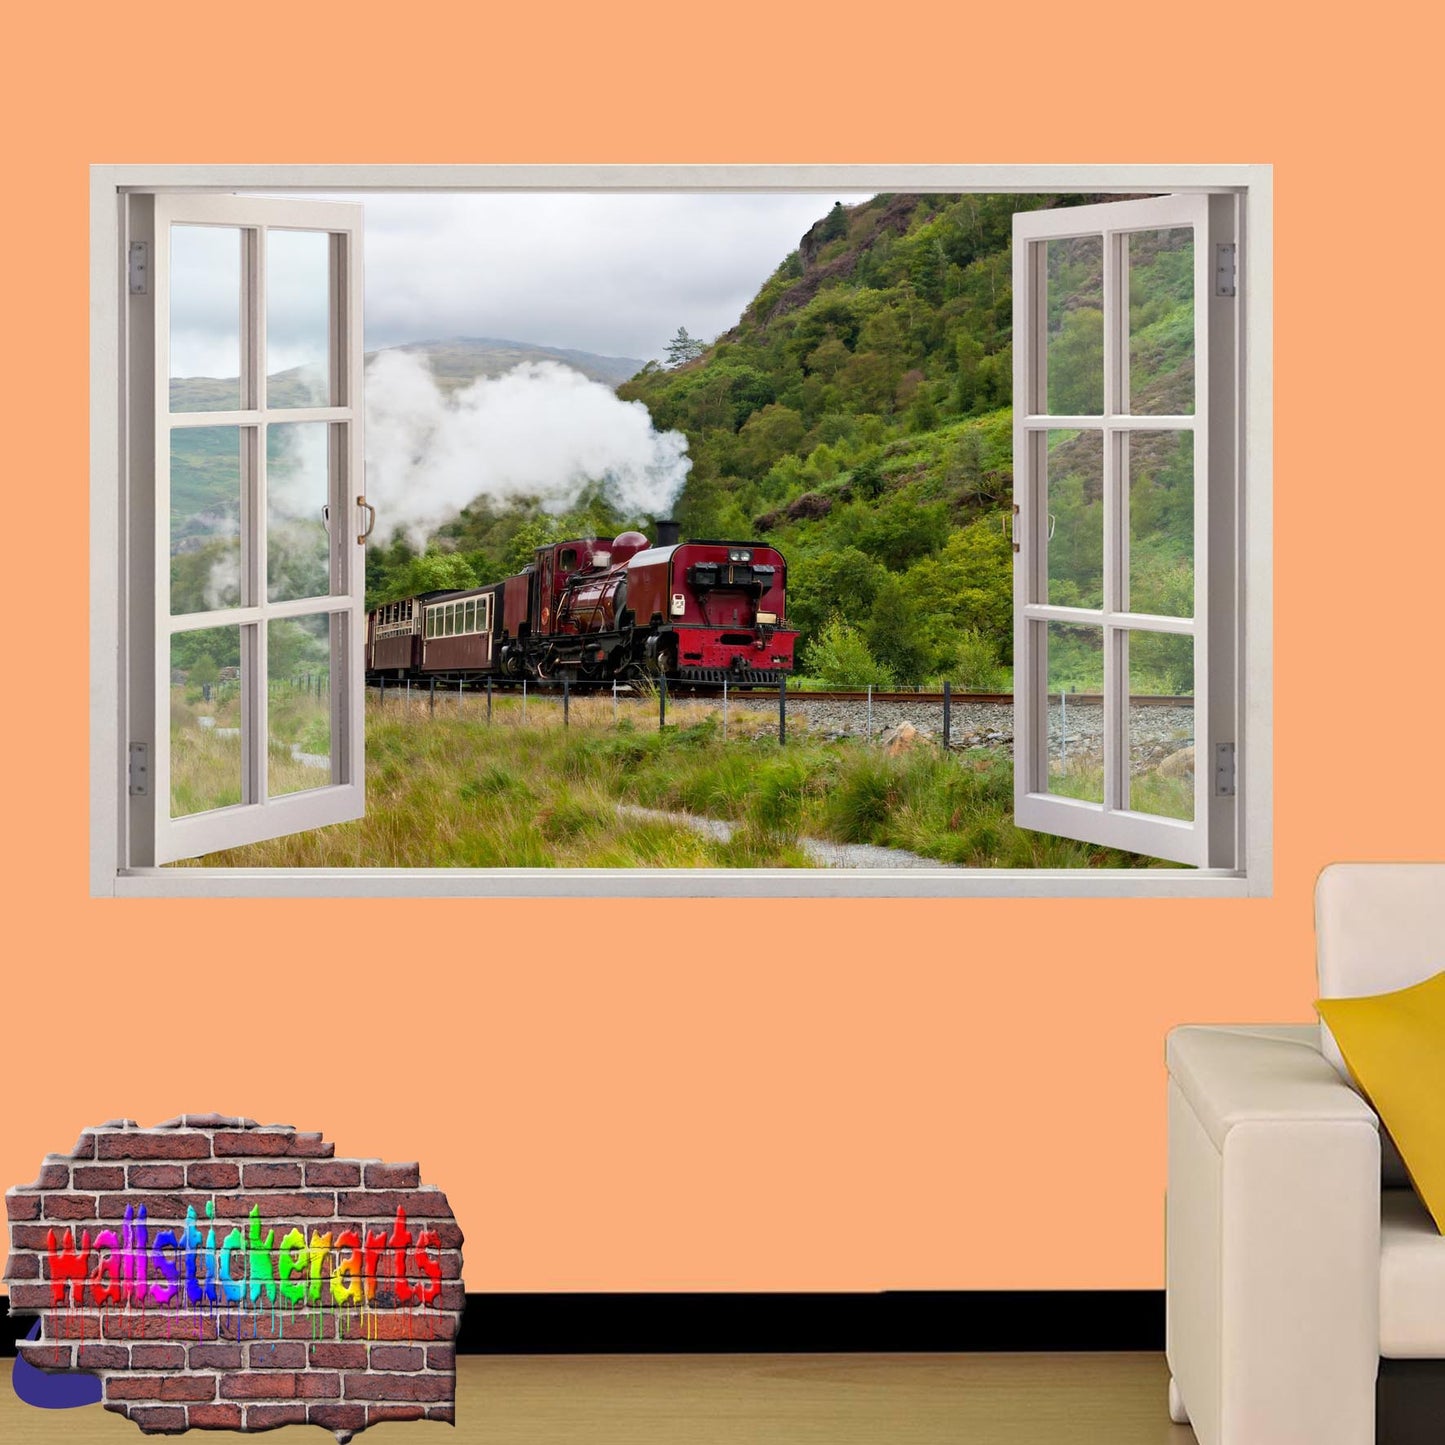 Snowdonia Train Mountain 3d Art Smashed Effect Wall Sticker Room Office Nursery Shop Decoration Decal Mural XF9